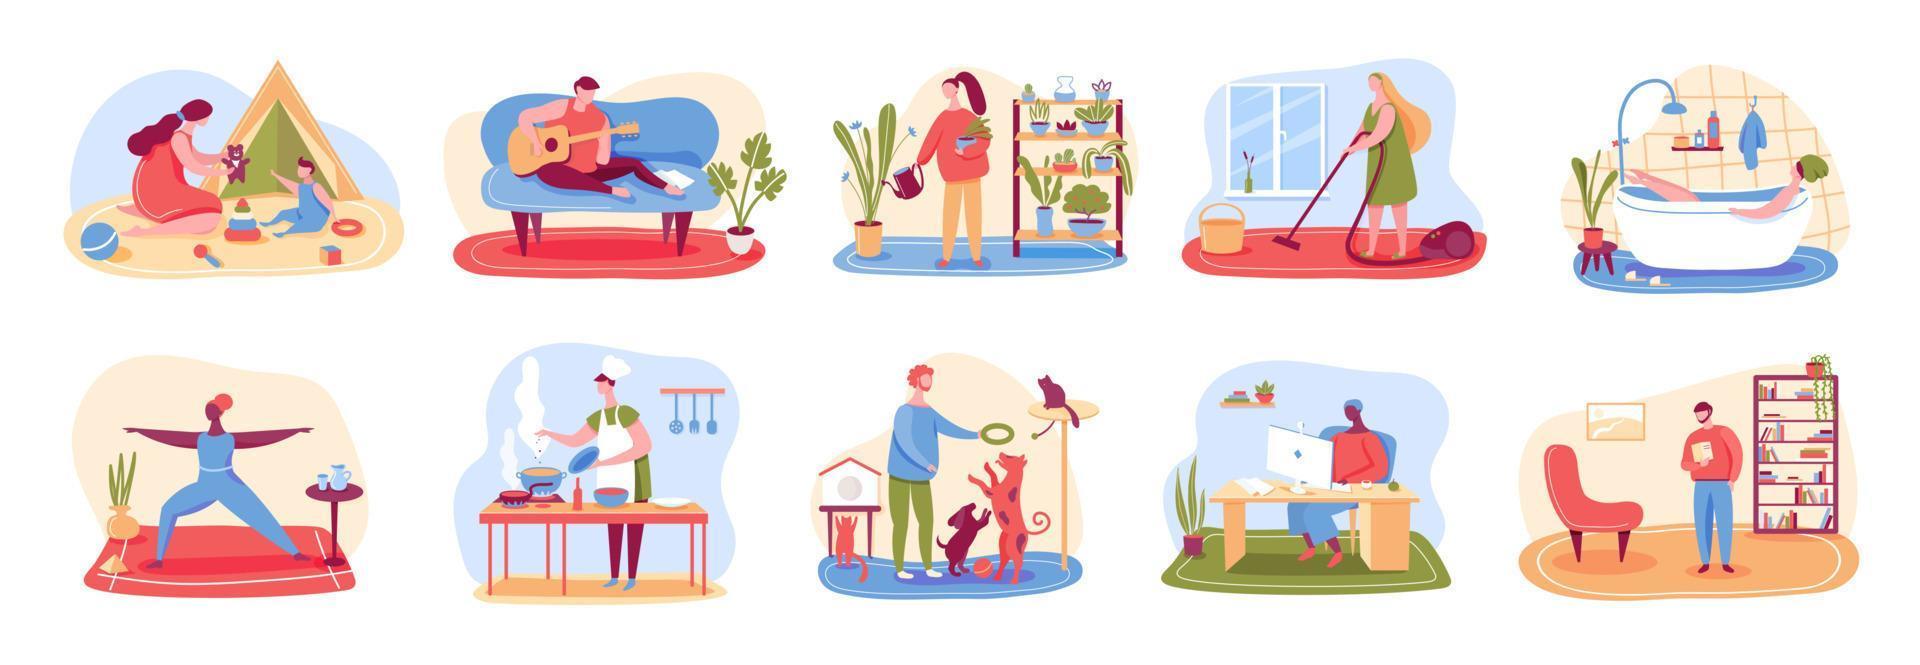 Home activities. People cleaning home, cooking, taking bath, playing with pets, practicing yoga, reading. Leisure time, relaxing indoor activity vector set